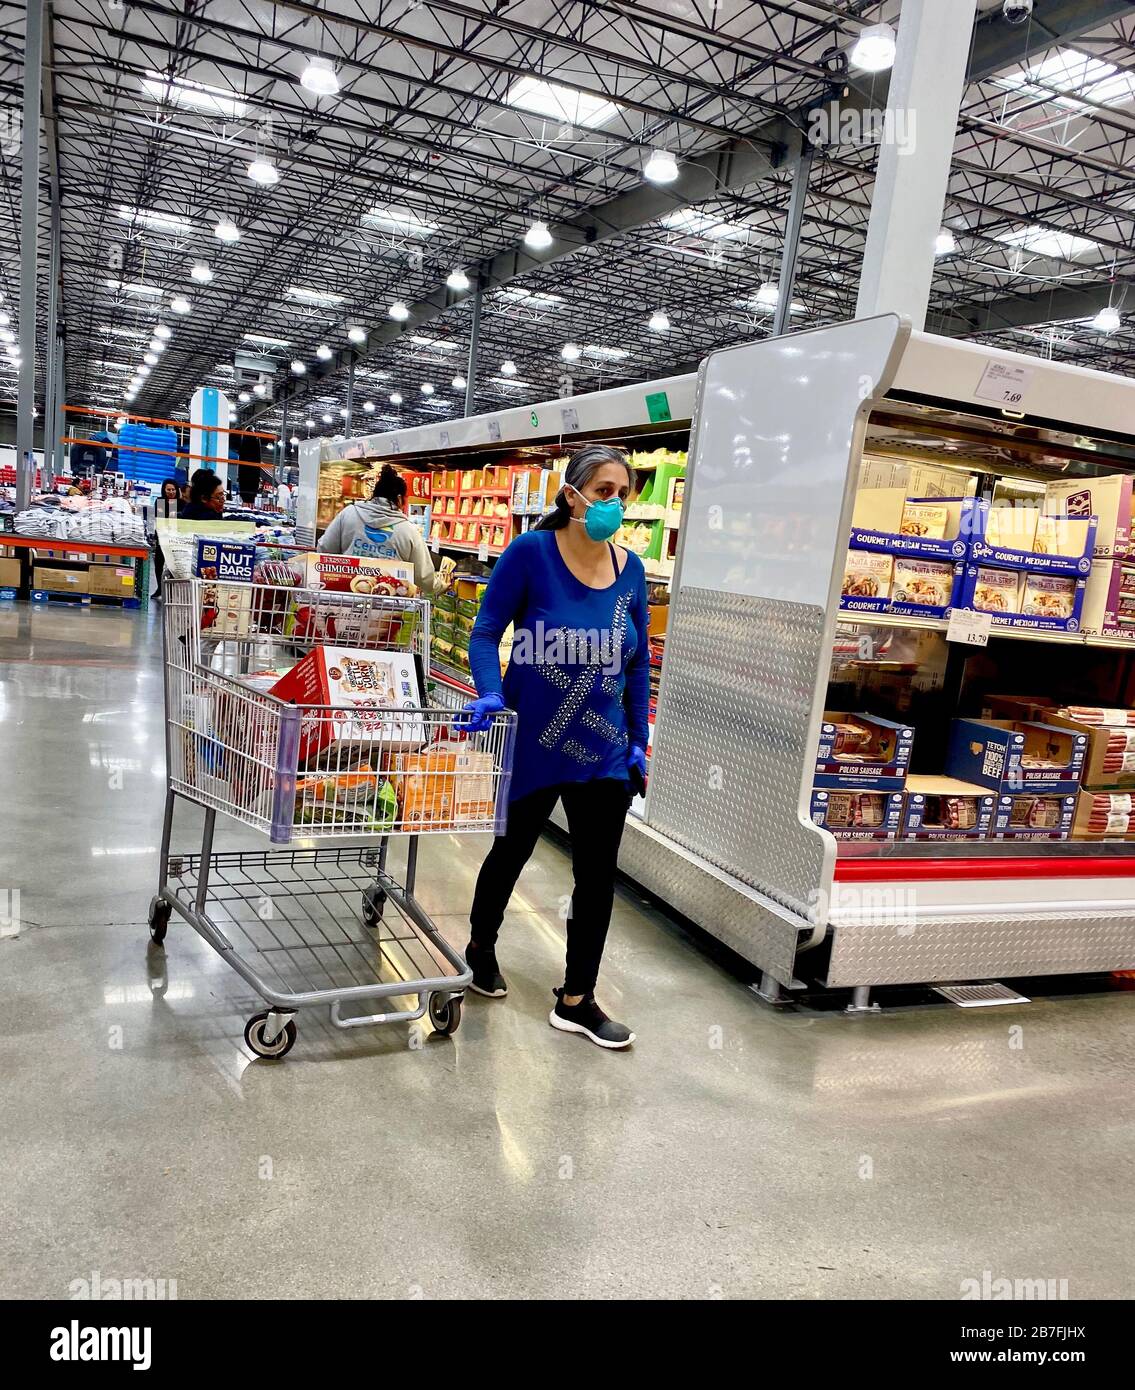 Santa Barbara, California, USA. 15th Mar, 2020. A run on water, meat and toilet paper as fears of the Covid-19 virus and a possible national mandatory quarantine send residents flocking to Costco, Goleta (Santa Barbara, CA) to stock up. Managers stand in front of the empty shelves doling out todayÃs shipment of bulk water, rationing it to two cases of water per buyer, and one pack of toilet paper. Many are filling up their cars with more than the allotted amount. Credit: ZUMA Press, Inc./Alamy Live News Stock Photo